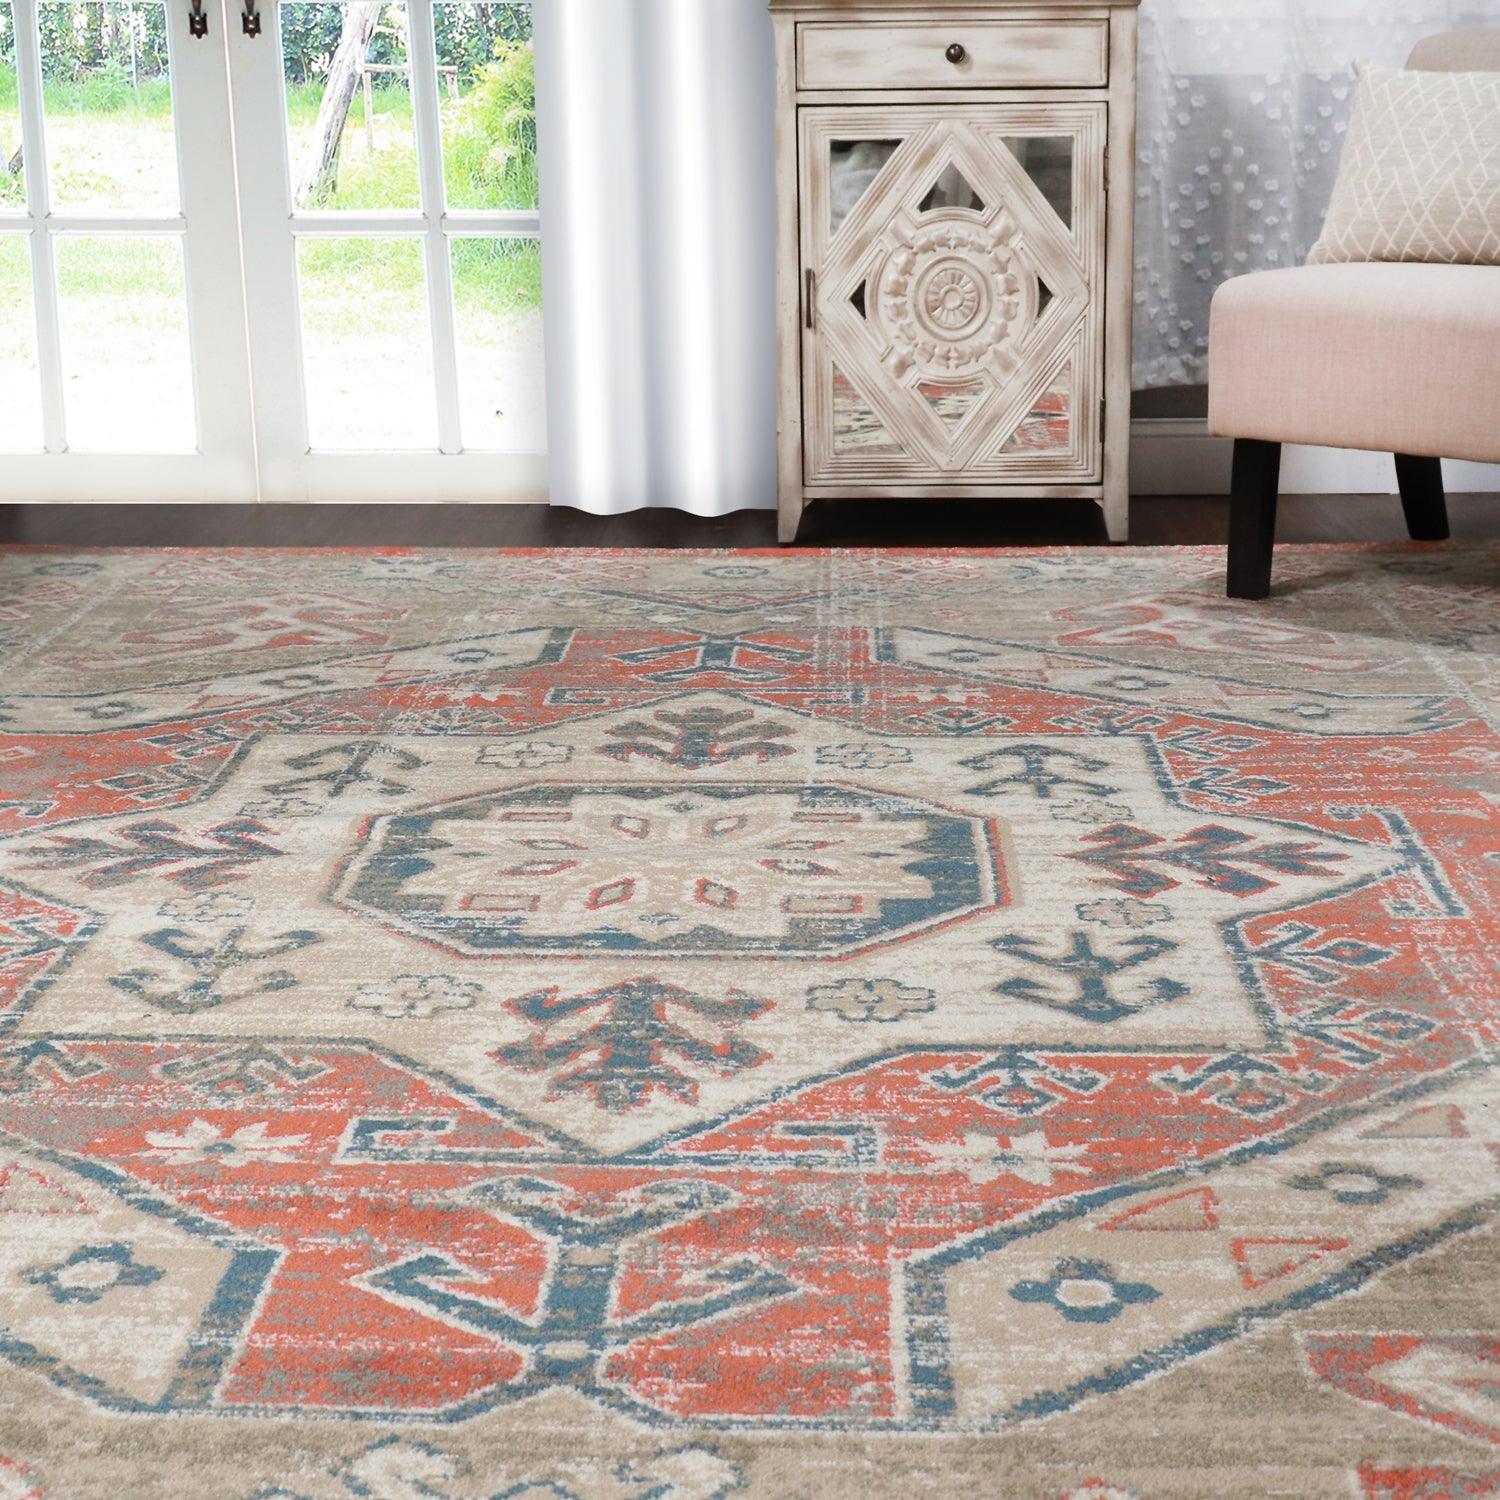 Rustic Distressed Geometric Design Indoor Home Area Rug Collection - Rust